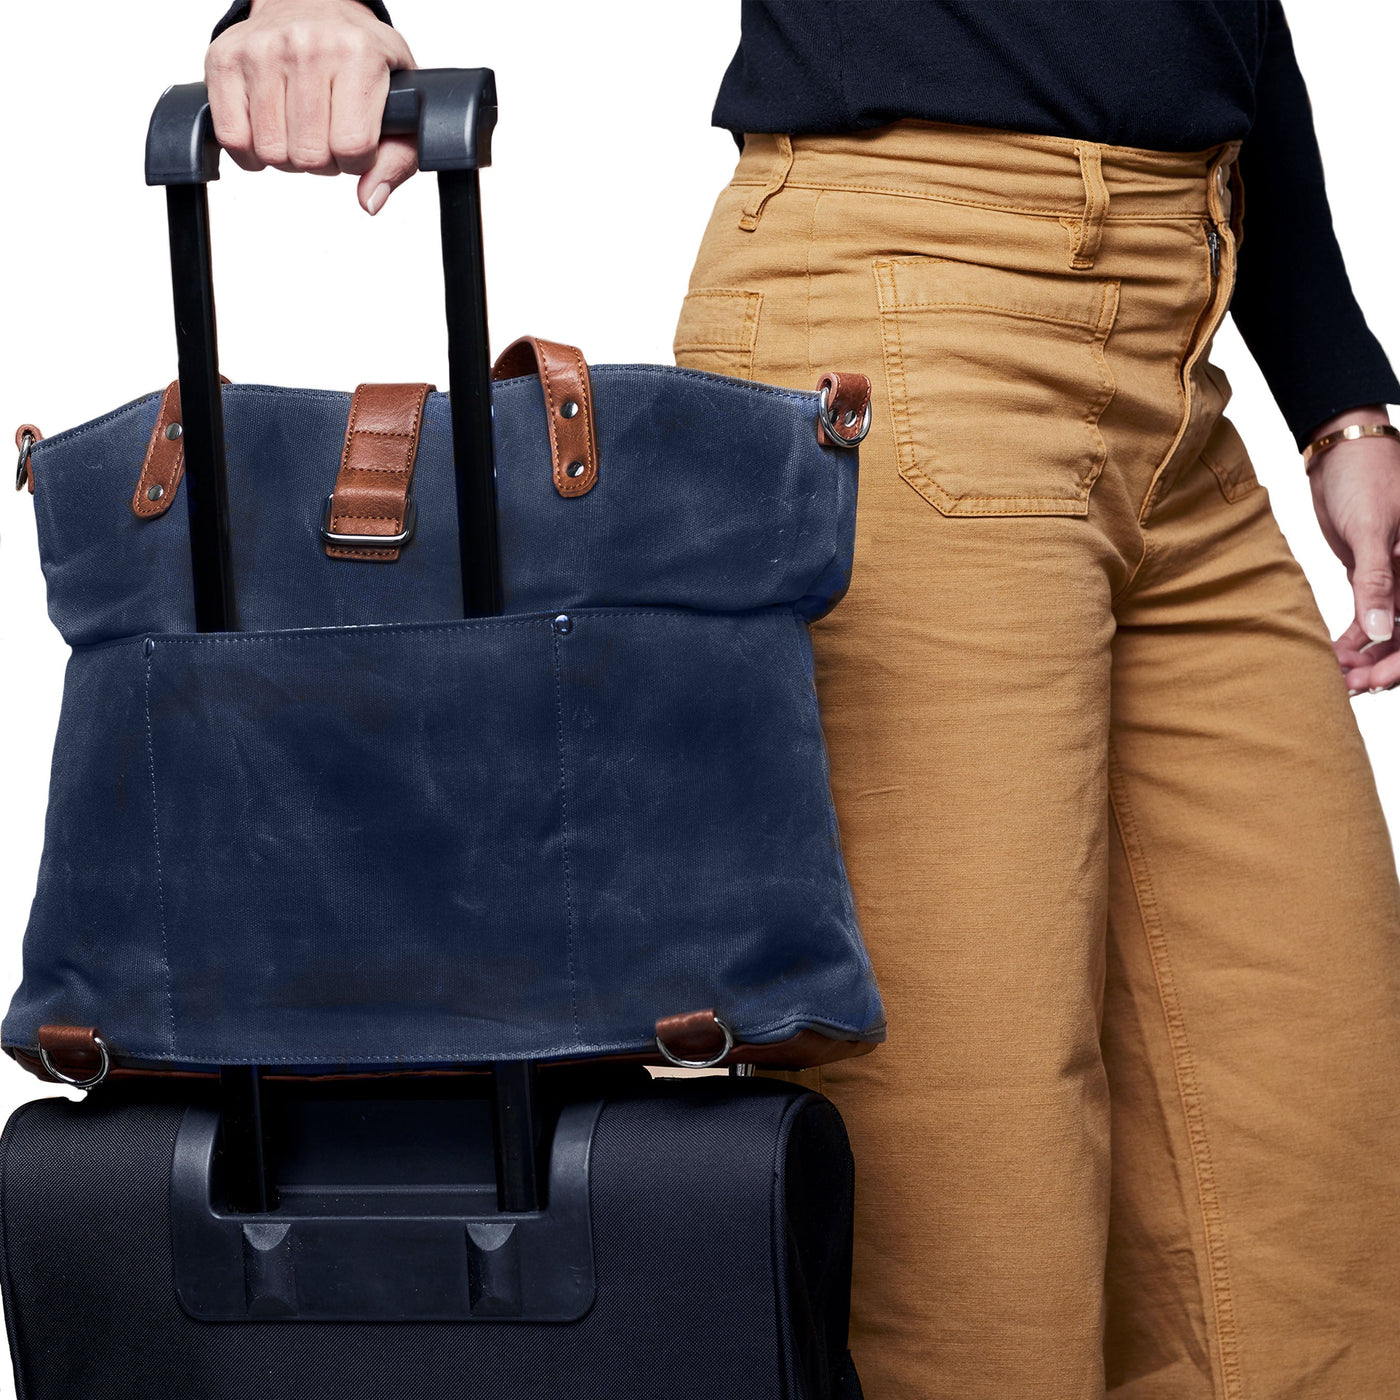 Navy blue waxed canvas tote mounted on luggage handle of black rolling bag using sleeve pocket, with mom pulling.